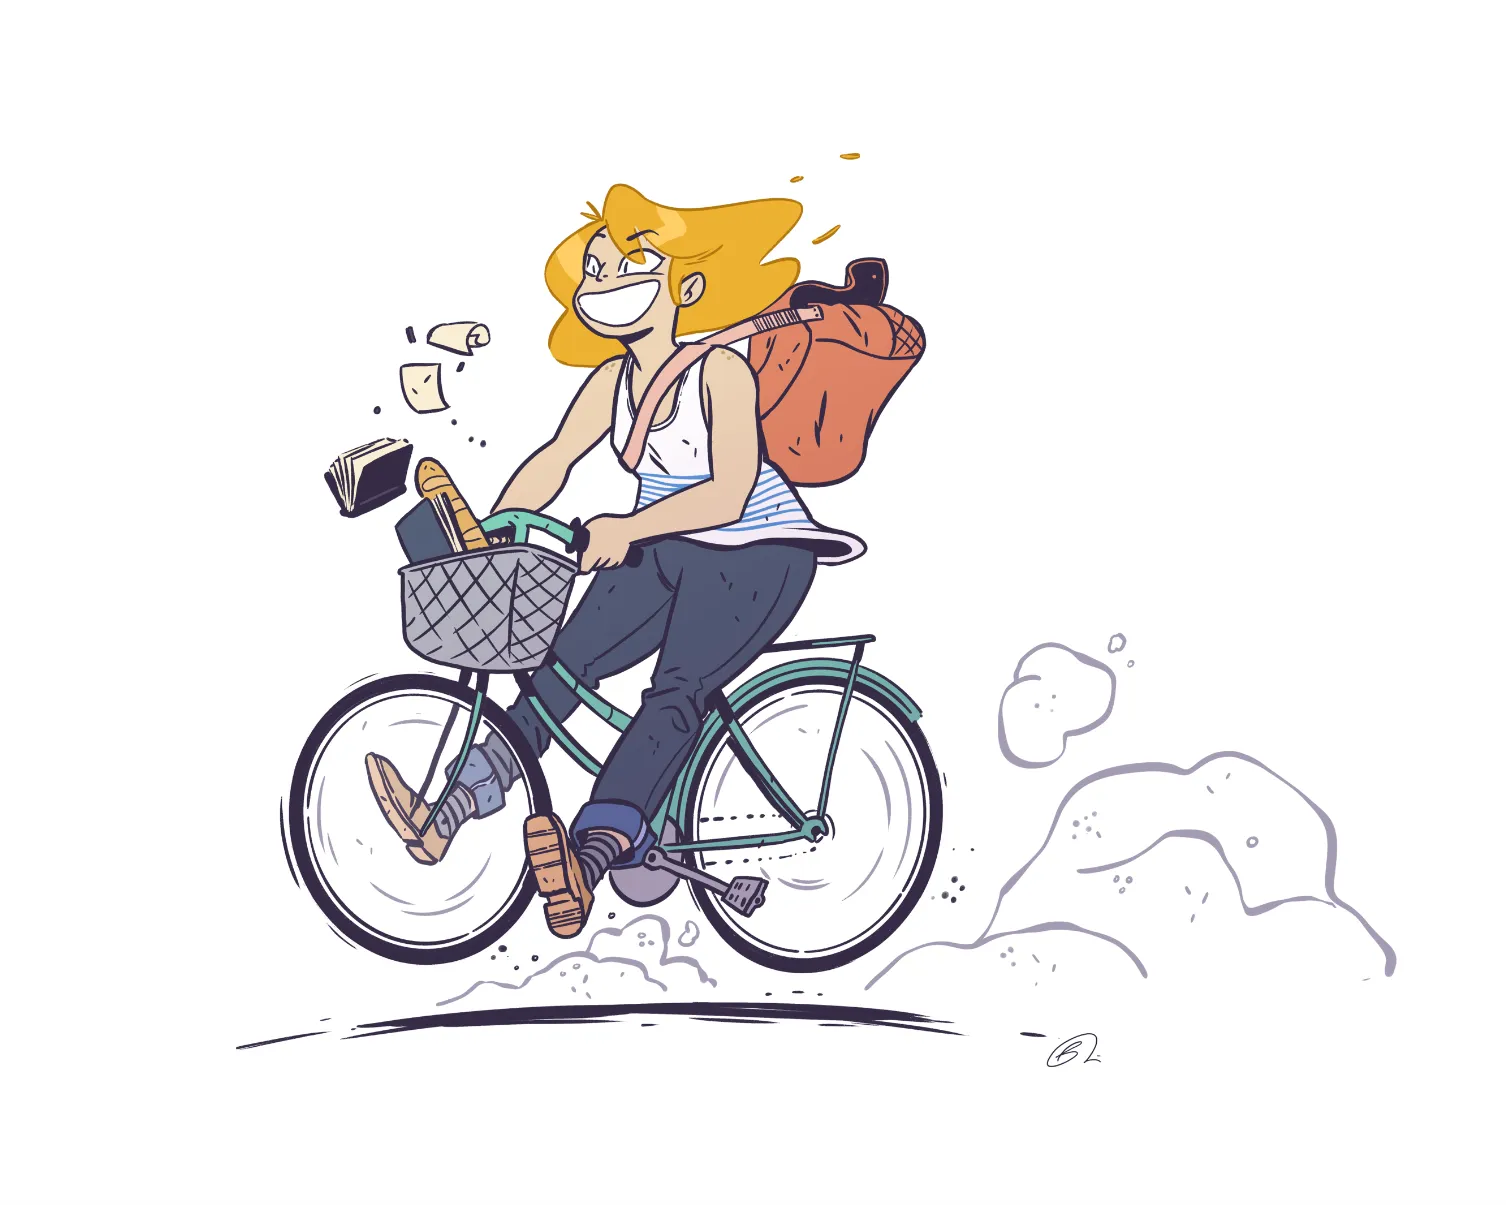 An illustration of a woman riding a bicycle